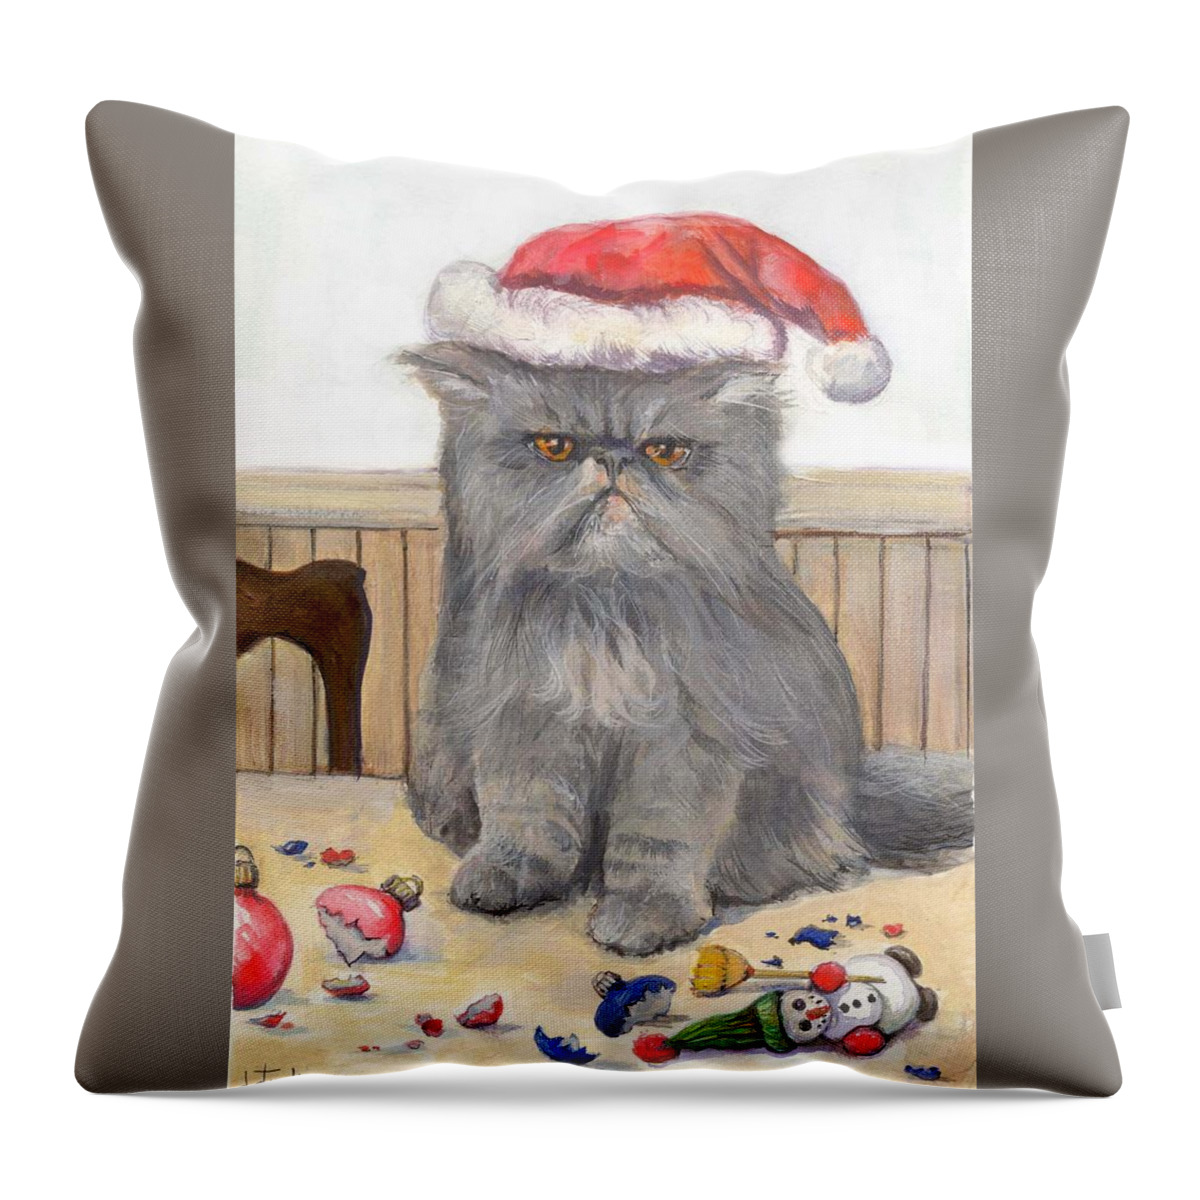 Nature Throw Pillow featuring the painting Bah Humbug by Donna Tucker